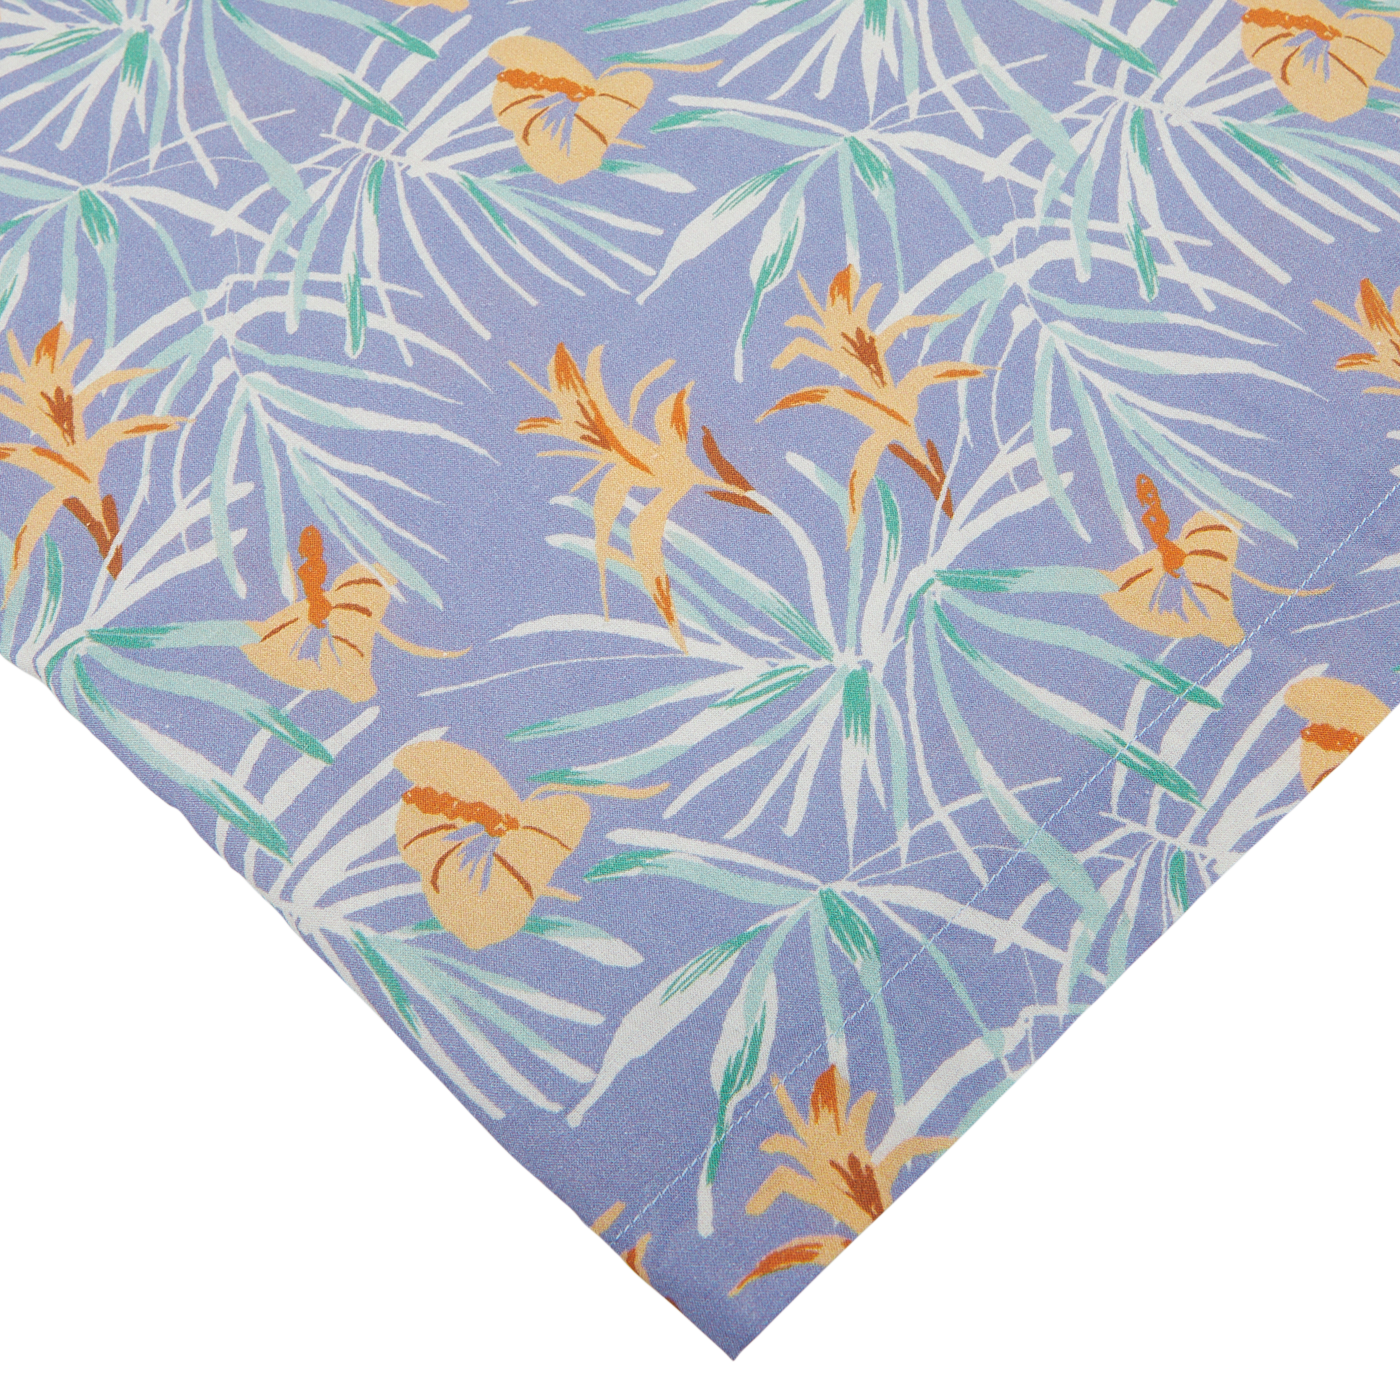 A summer essential Light Blue Floral Printed Cotton Shirt fabric on a plain background by Altea.